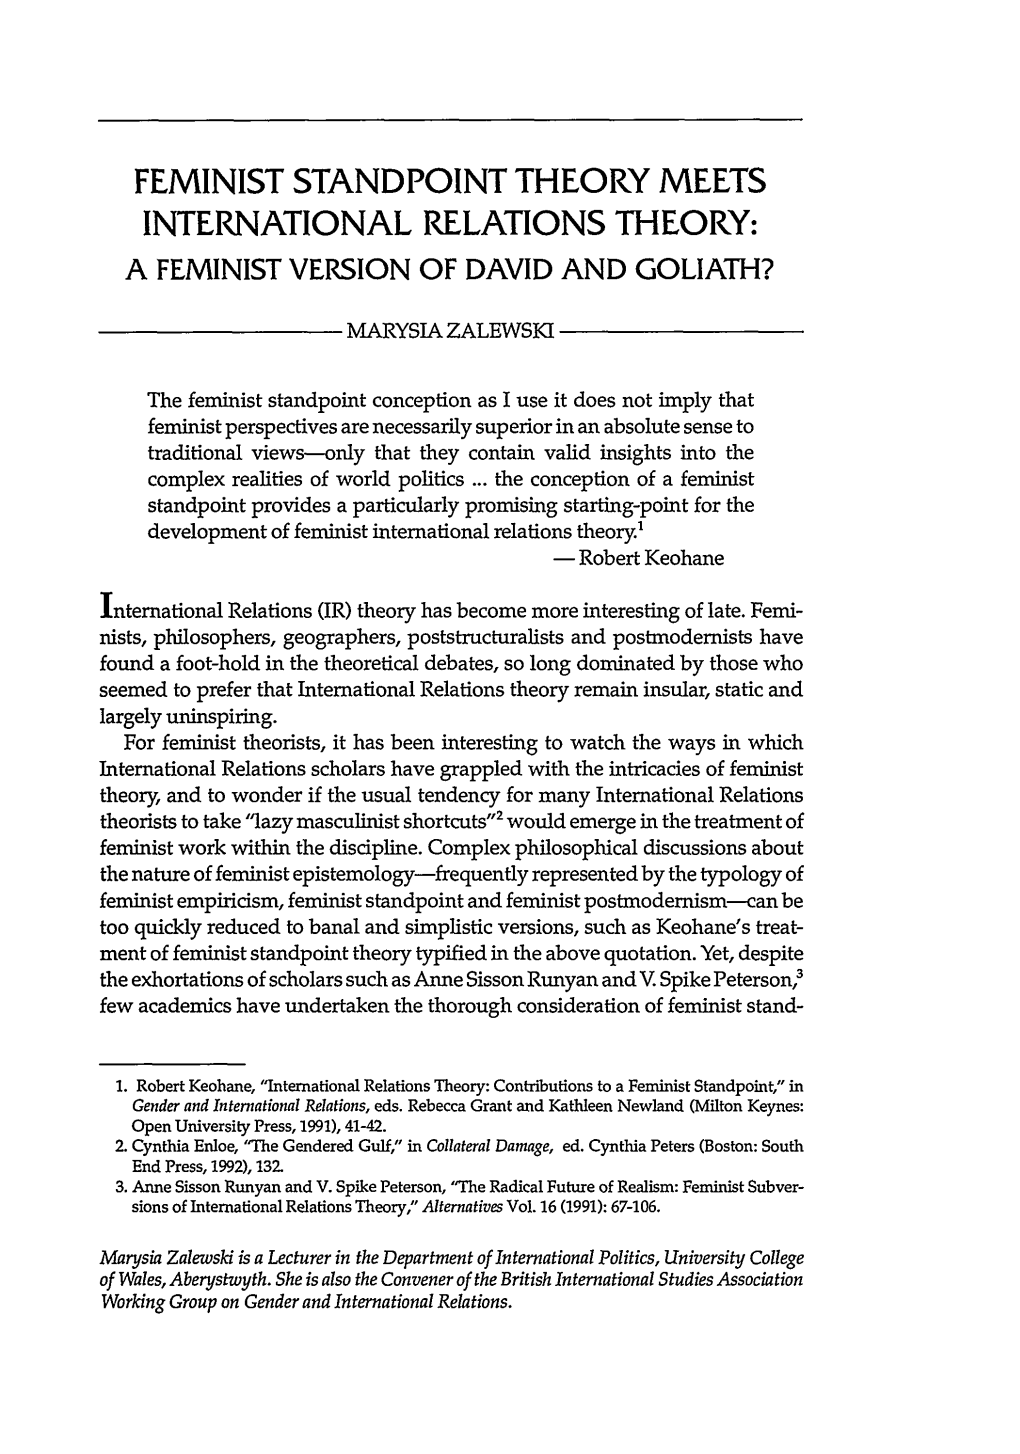 Feminist Standpoint Theory Meets International Relations Theory: a Feminist Version of David and Goliath?